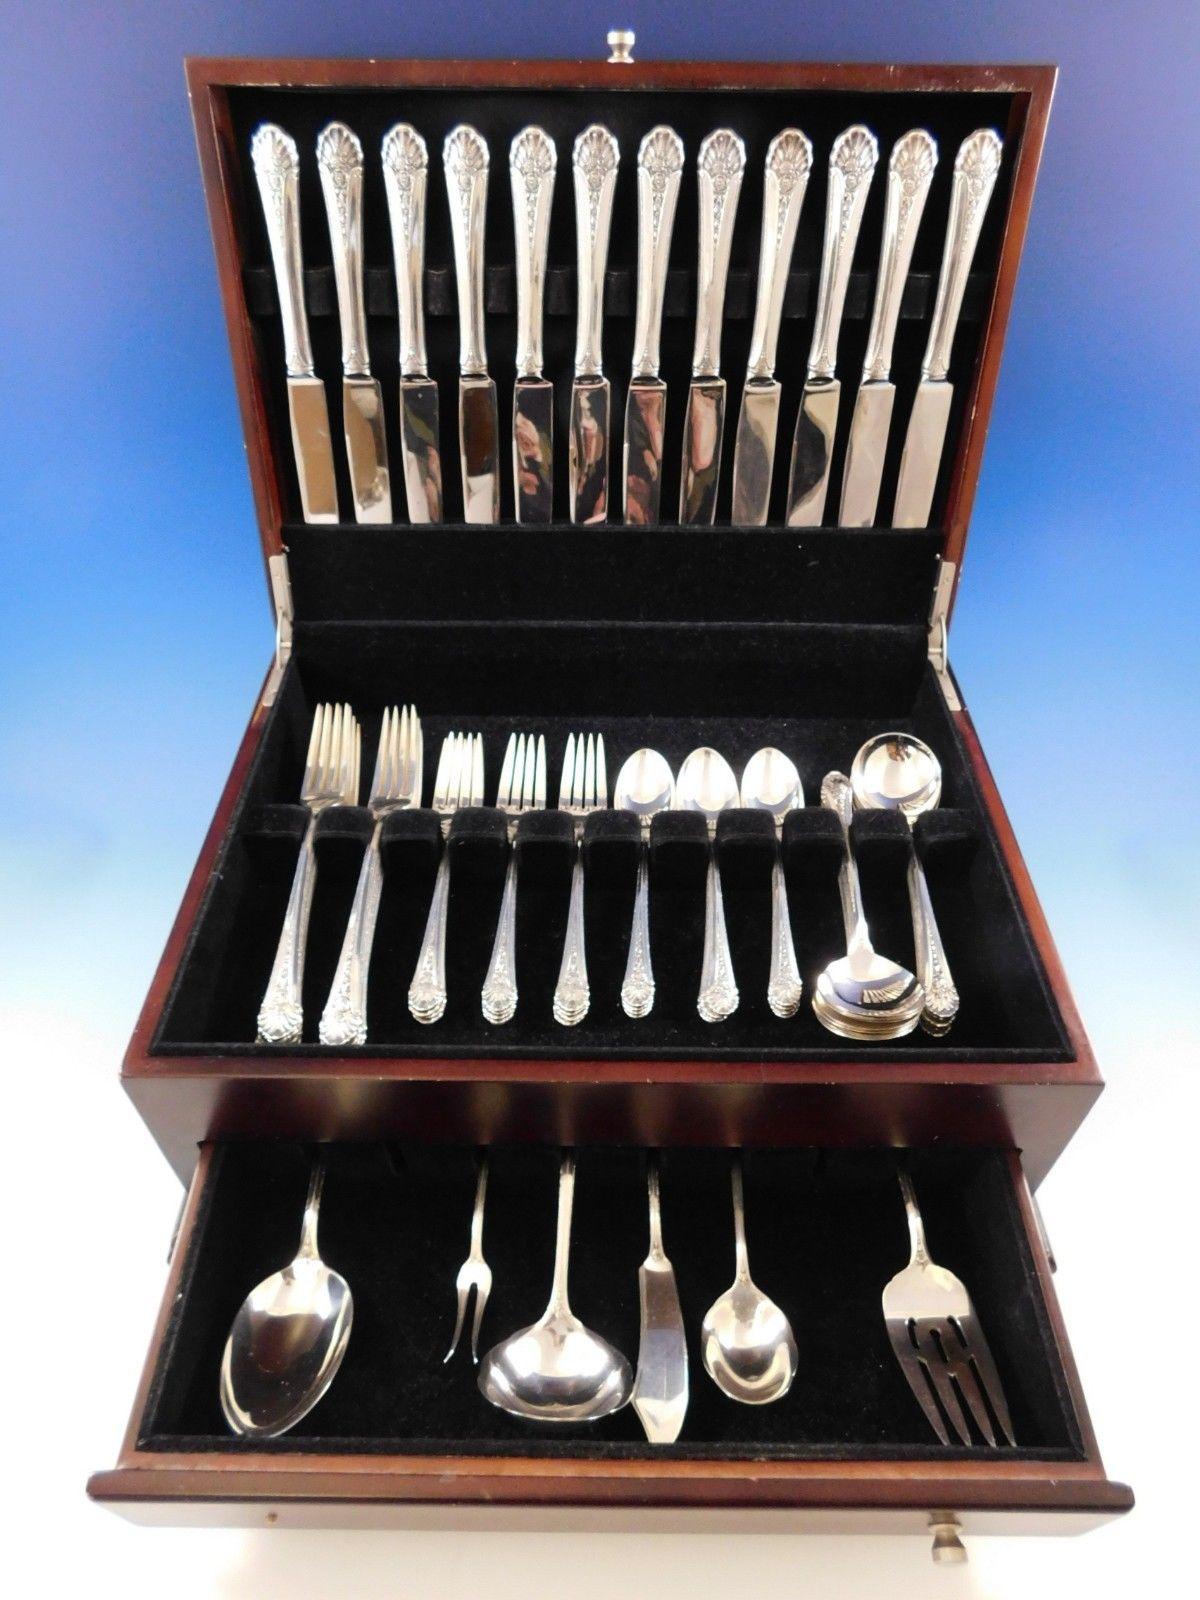 Beautiful Royal Windsor by Towle sterling silver dinner size flatware set of 66 pieces. This set includes:

12 dinner knives, 9 1/2